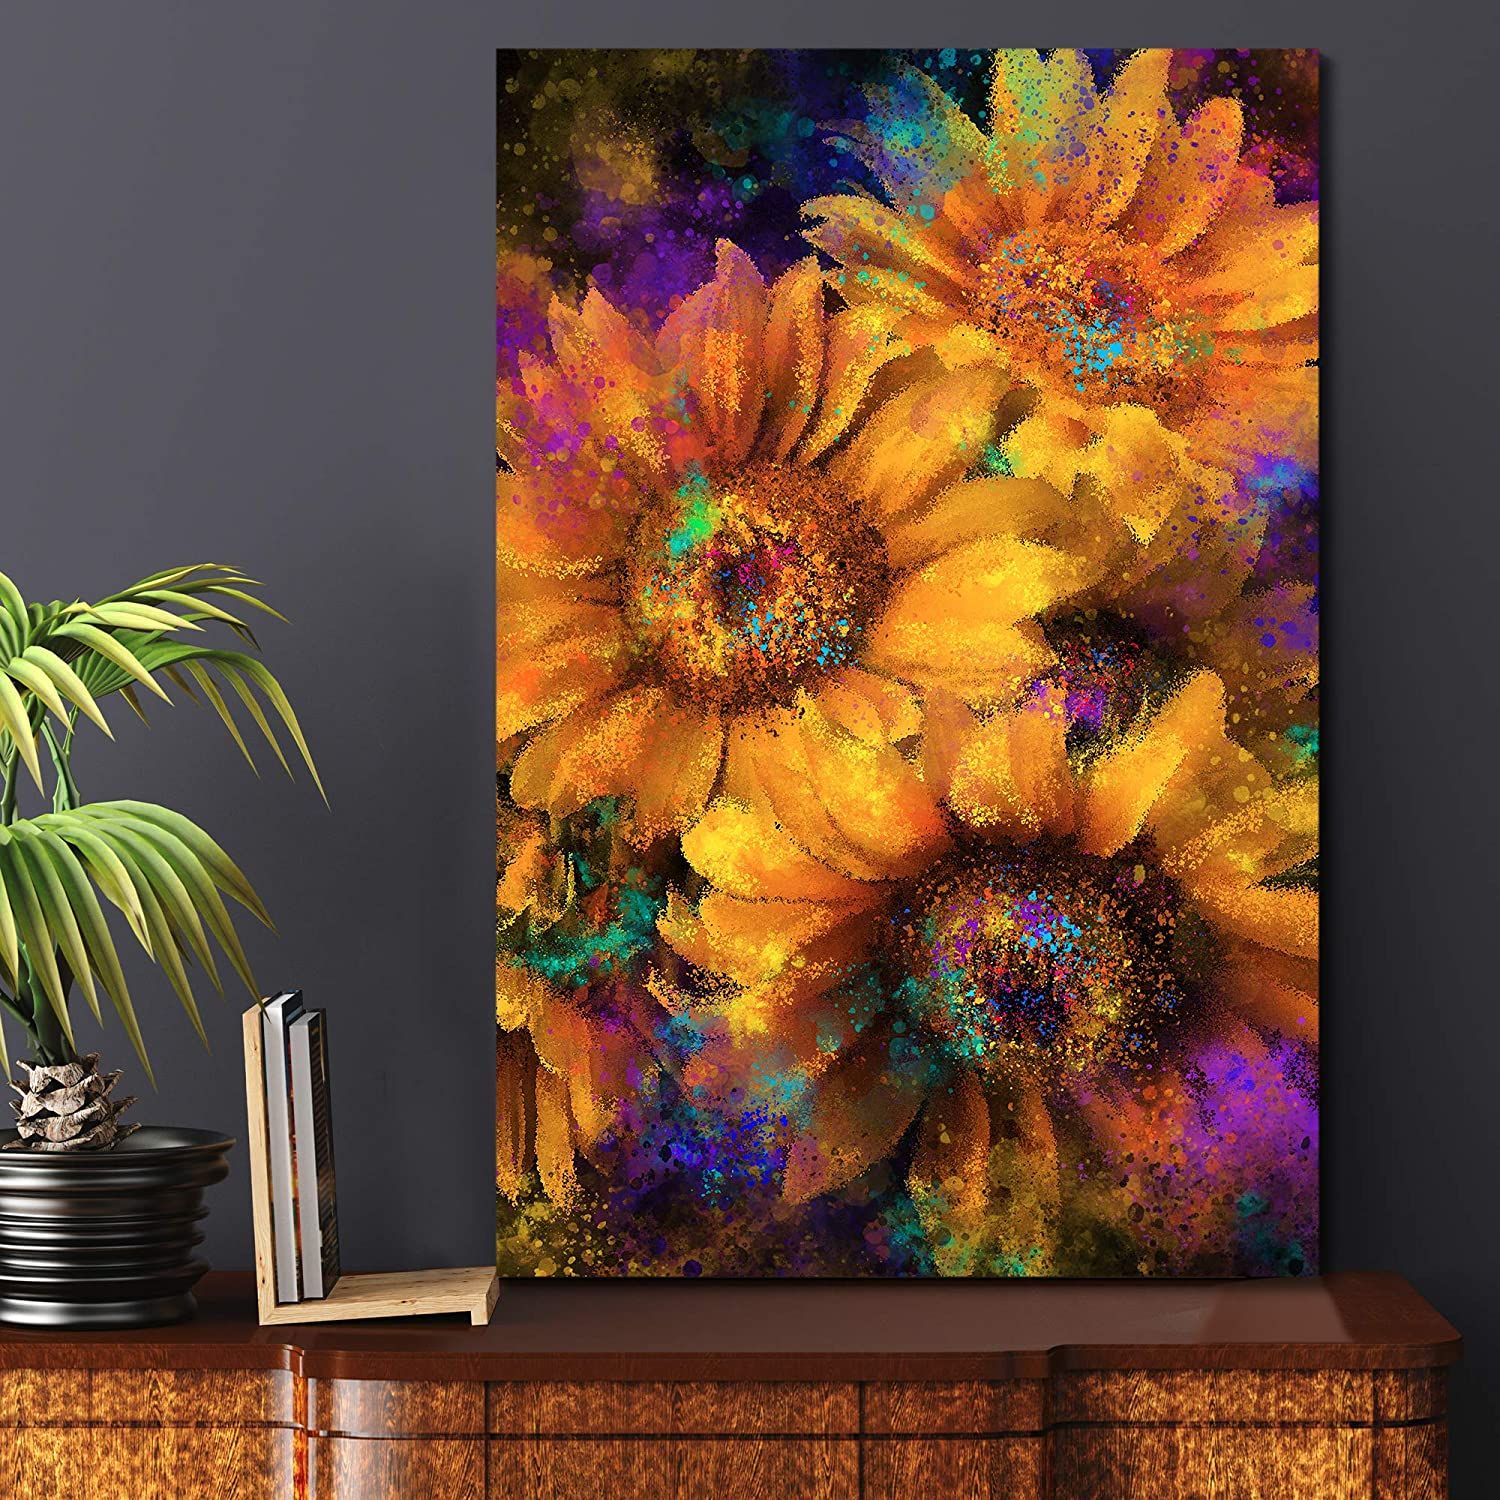 Wall26 Canvas Wall Art Sunflower Painting Wall Decor Stretched And With Regard To Recent Sunflower Metal Framed Wall Art (View 4 of 20)